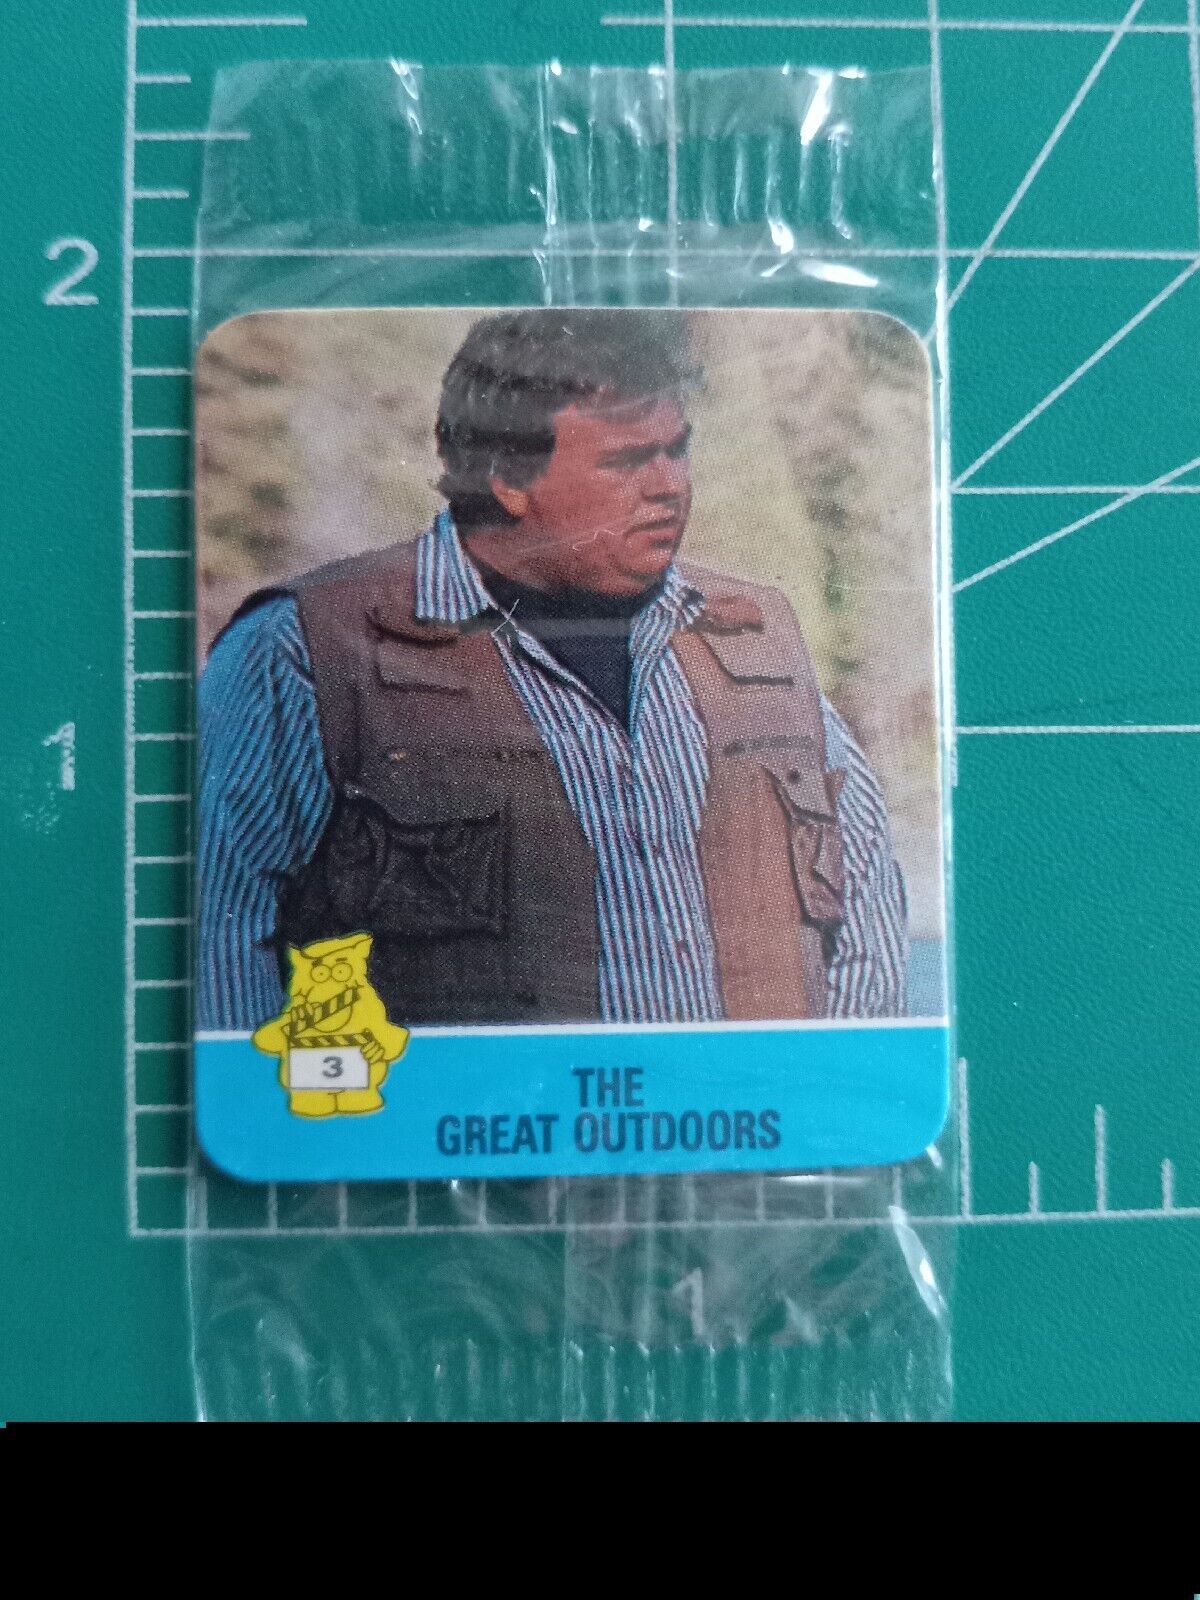 1988 HOSTESS THE GREAT OUTDOORS movie JOHN CANDY actor ROOKIE Card SEALED